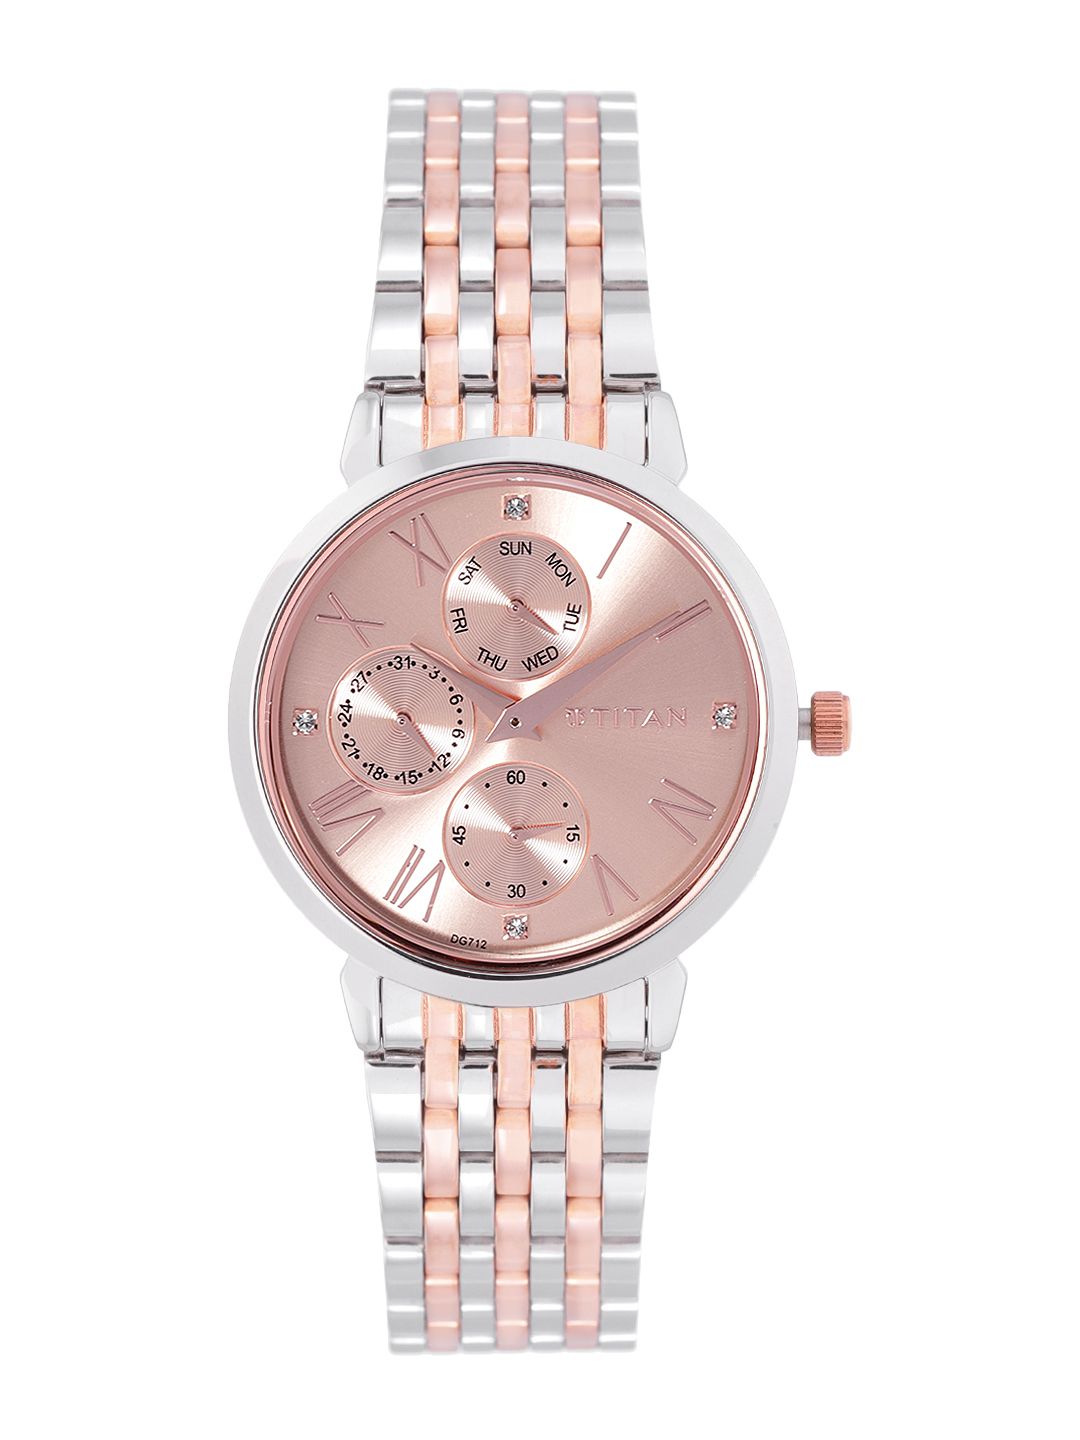 Titan Women Rose Gold-Toned Analogue Chronograph Watch NL2569KM02 Price in India